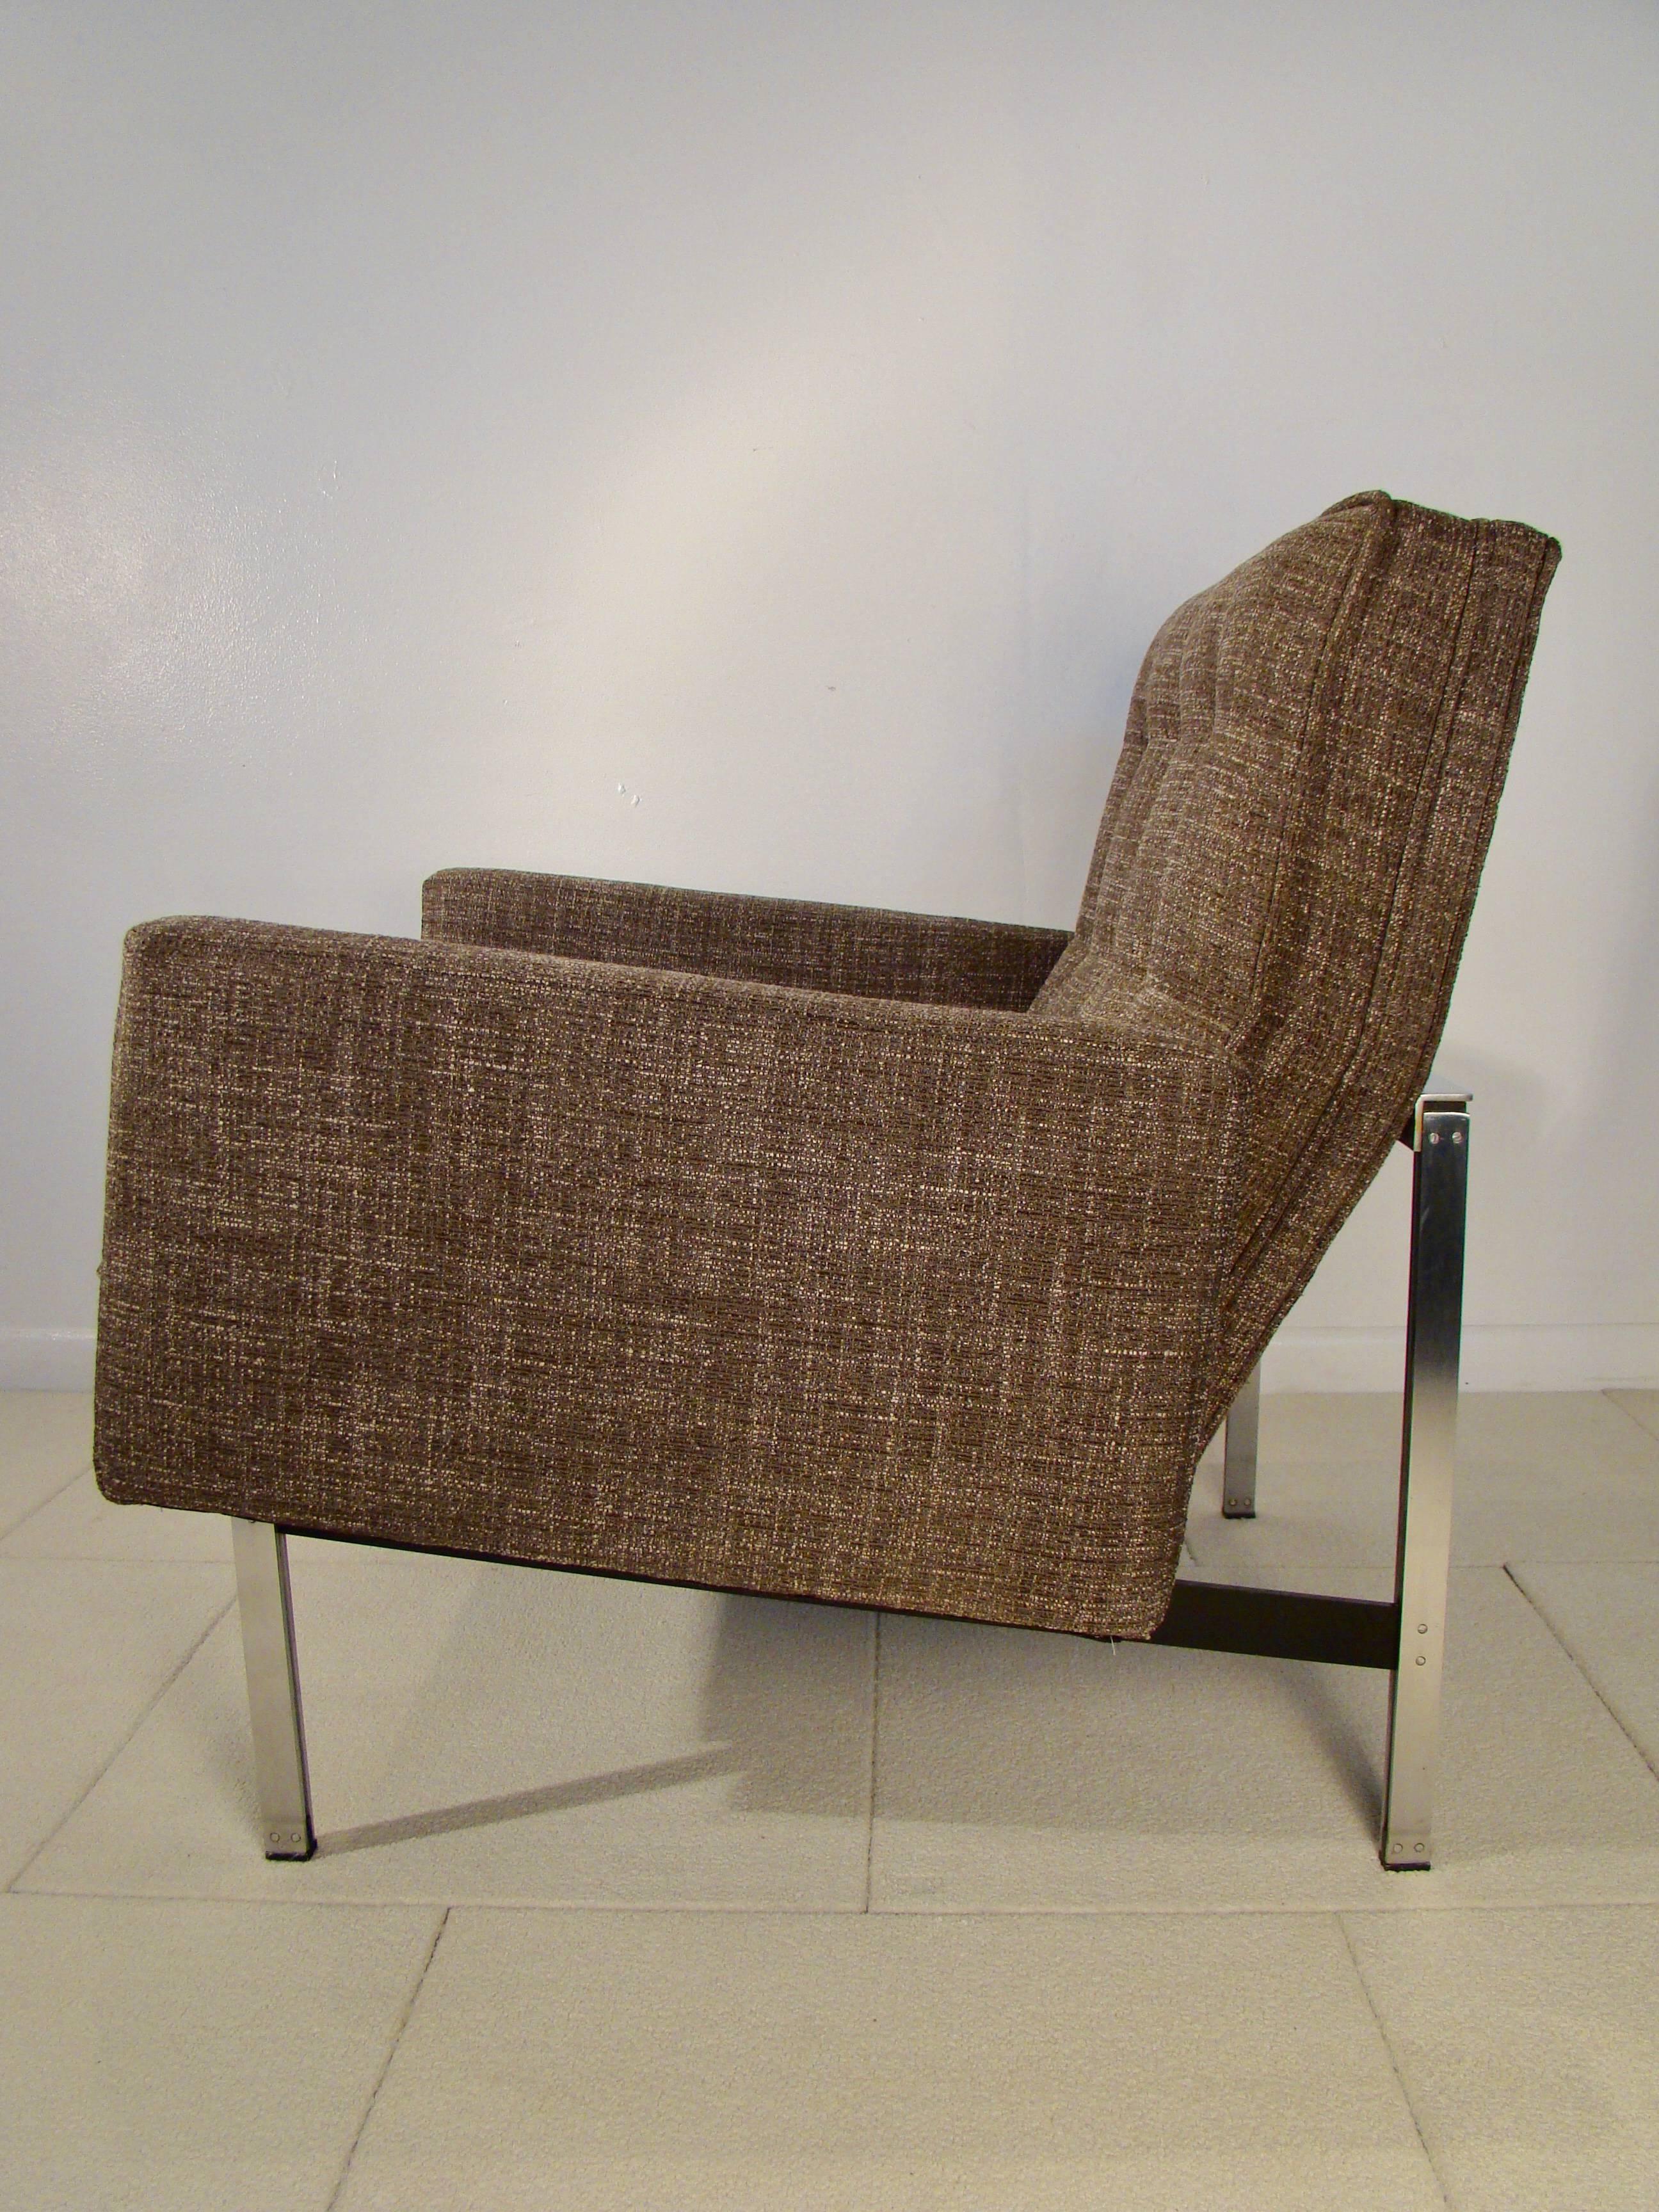 Vintage lounge design (1955) by Florence Knoll re-upholstered in a patterned
wool blend of cream/charcoal/chocolate thread elements complimented by a solid bar stainless steel open frame with bracket back legs (the darker images best represent the